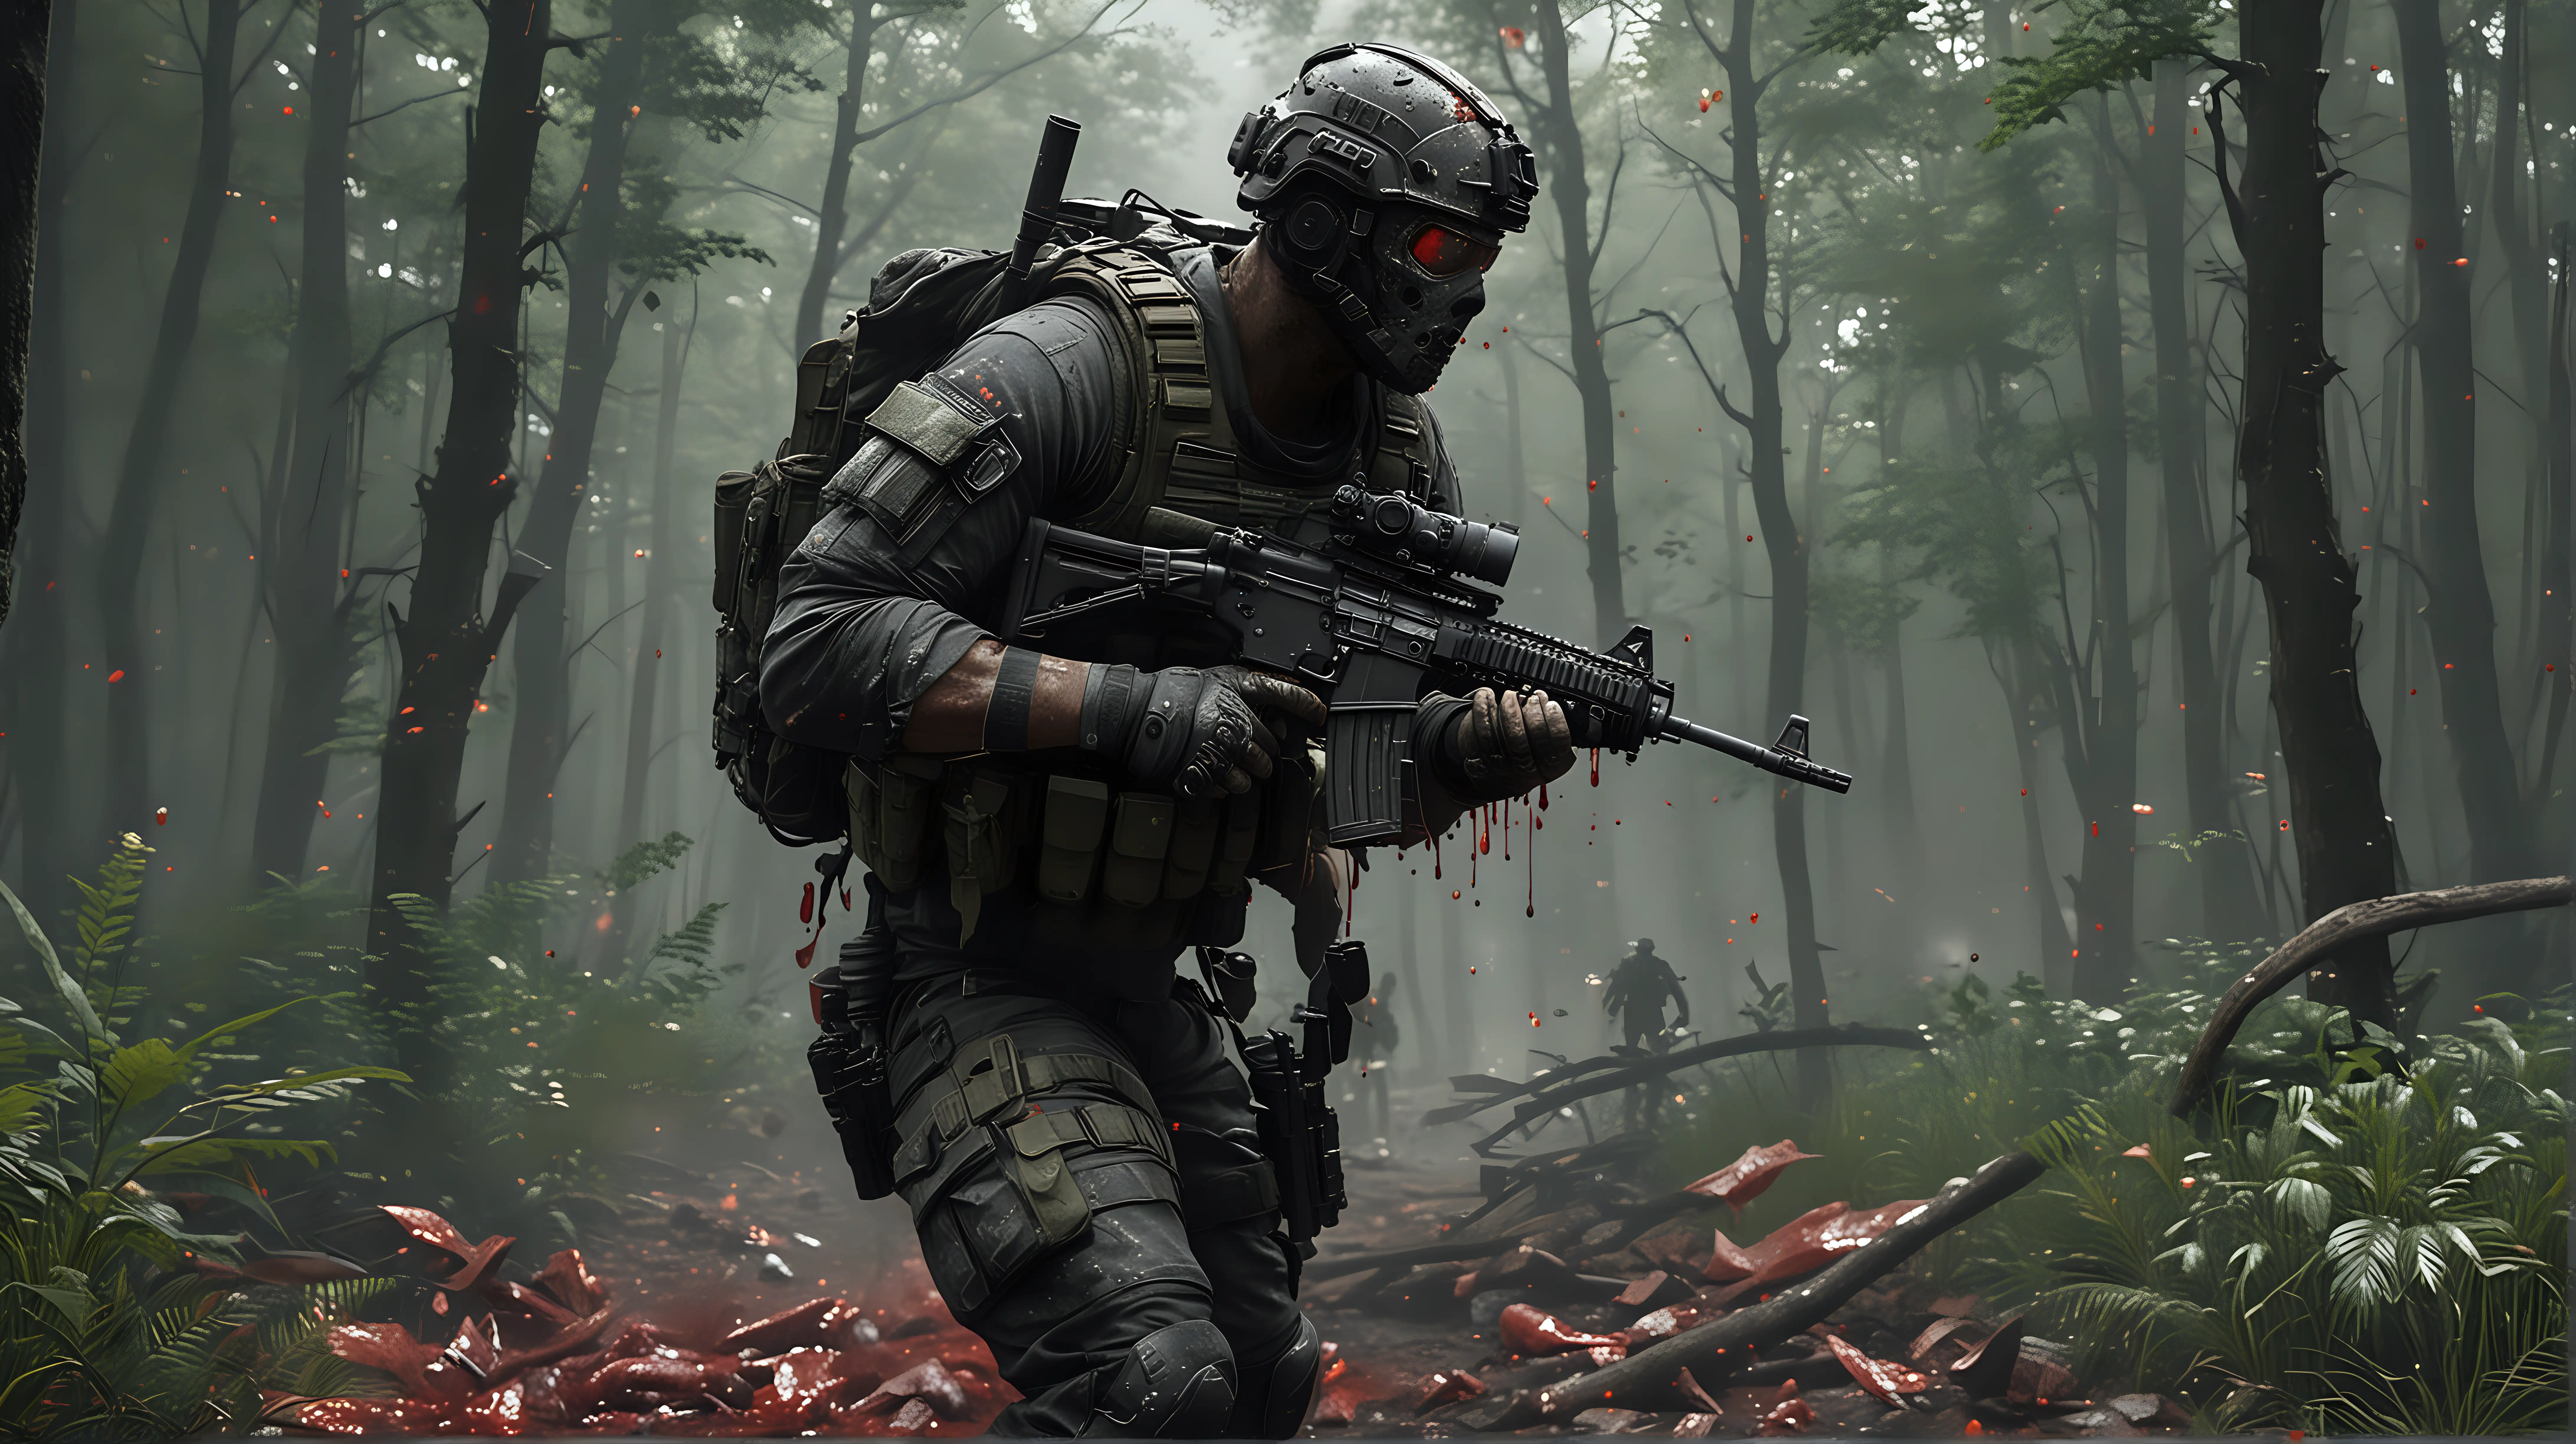 Hyperrealistic Ghost from Call of Duty in Blood and Cuts Forest Background